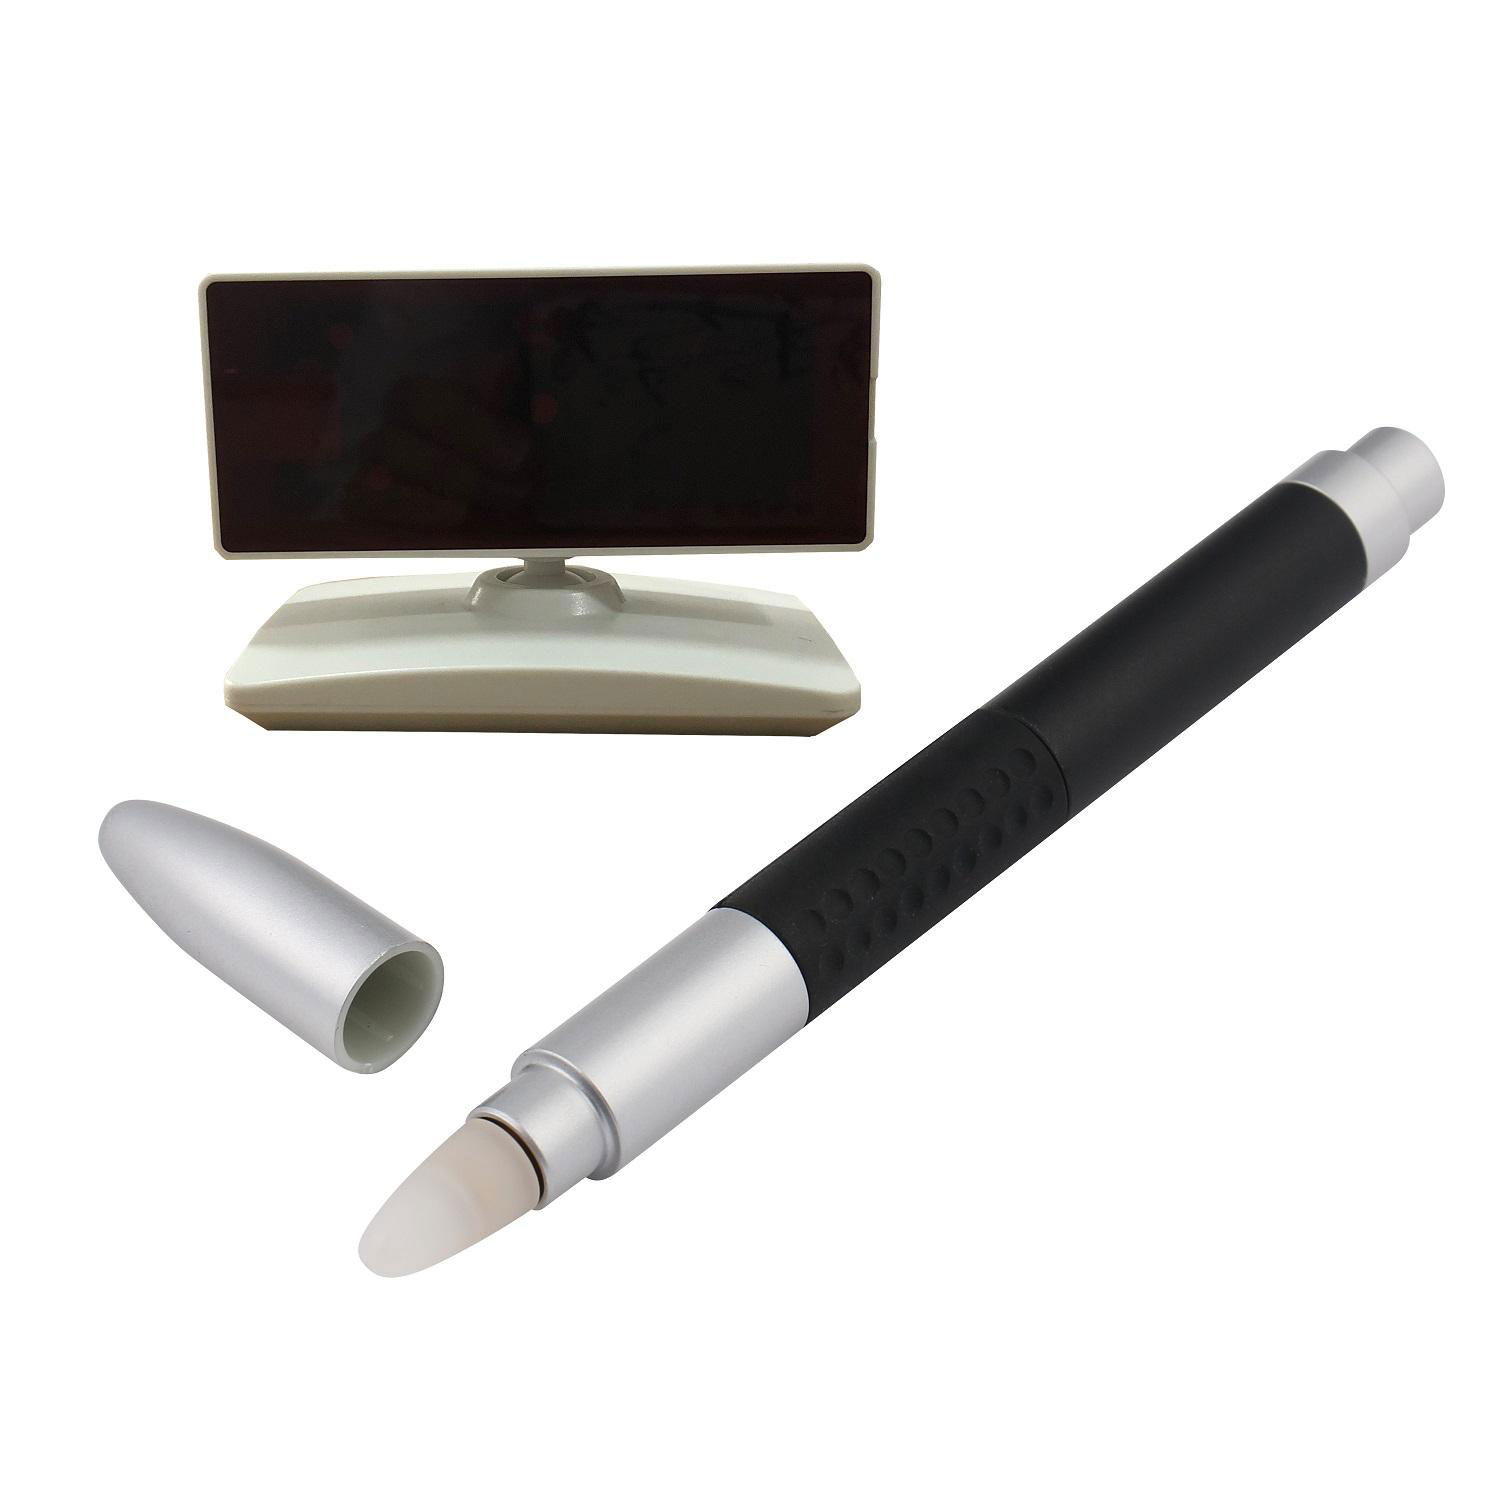 Interactive Whiteboard System Support Windows, Linux 2